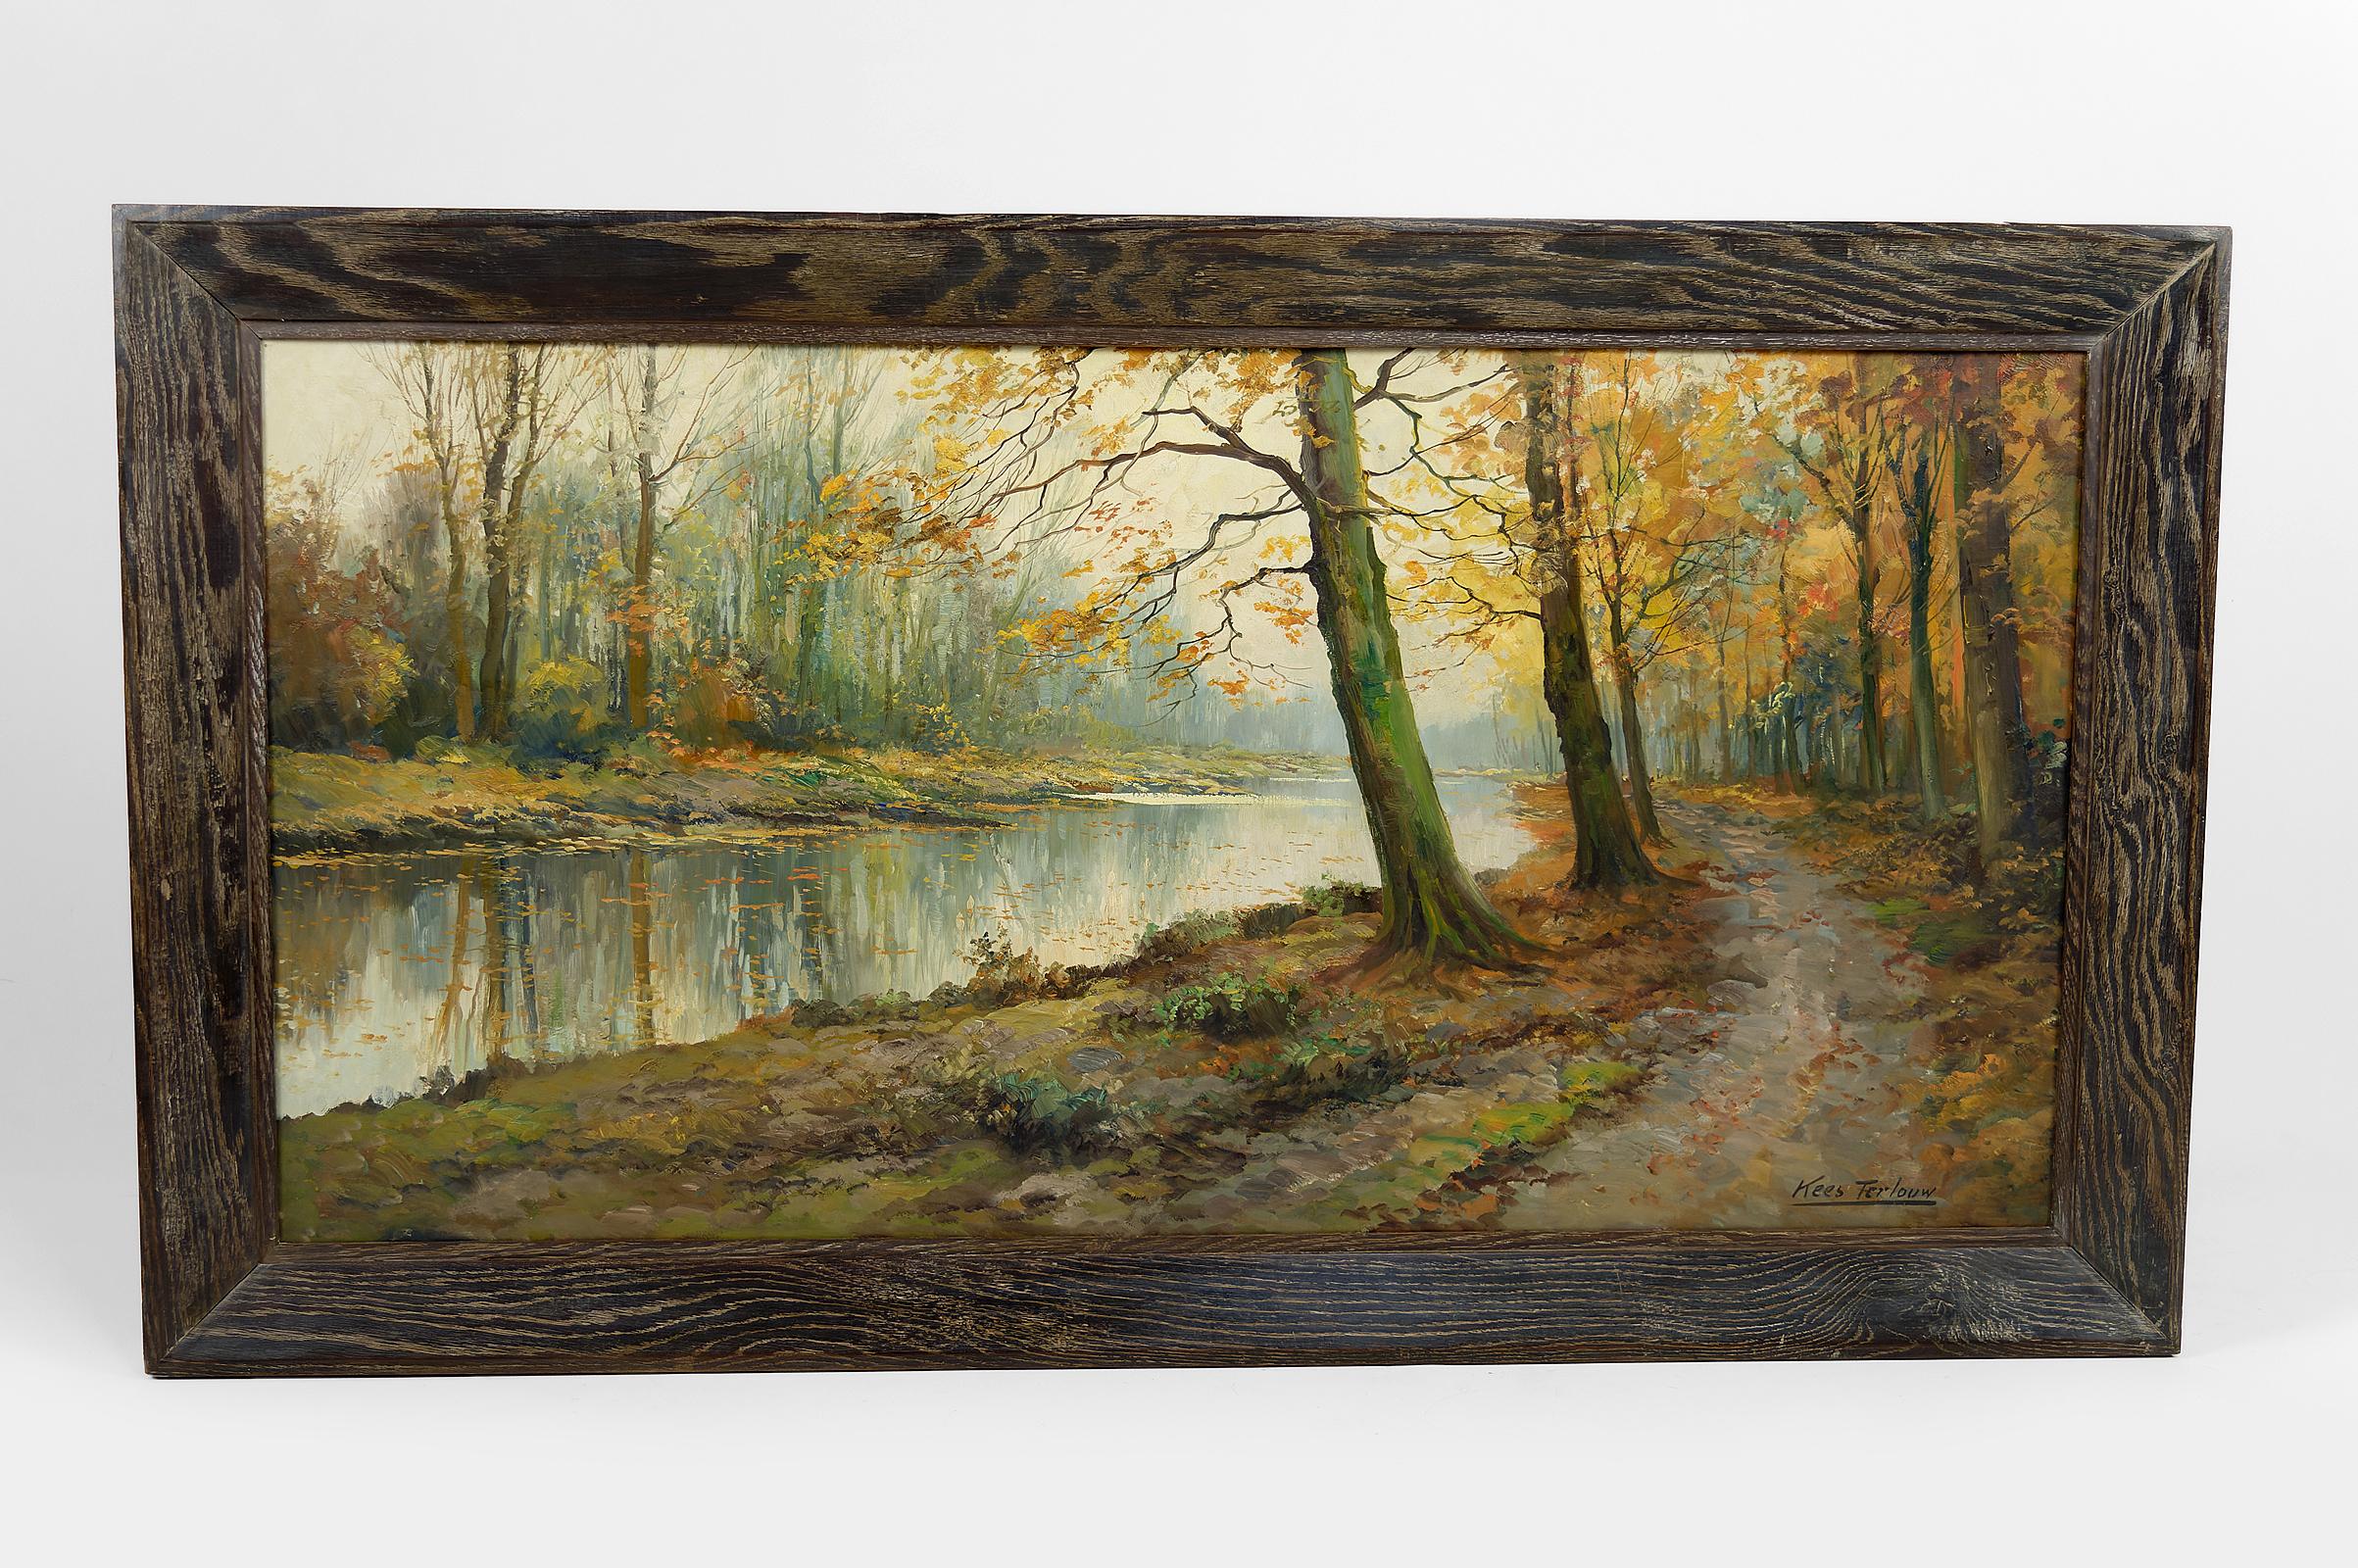 Superb and large framed canvas/painting depicting an autumn landscape: we see a walk / towpath in the forest, lined with trees losing their leaves, and along a stream. The trees on the other bank are reflected in the river/canal.

By Cornelius Kees